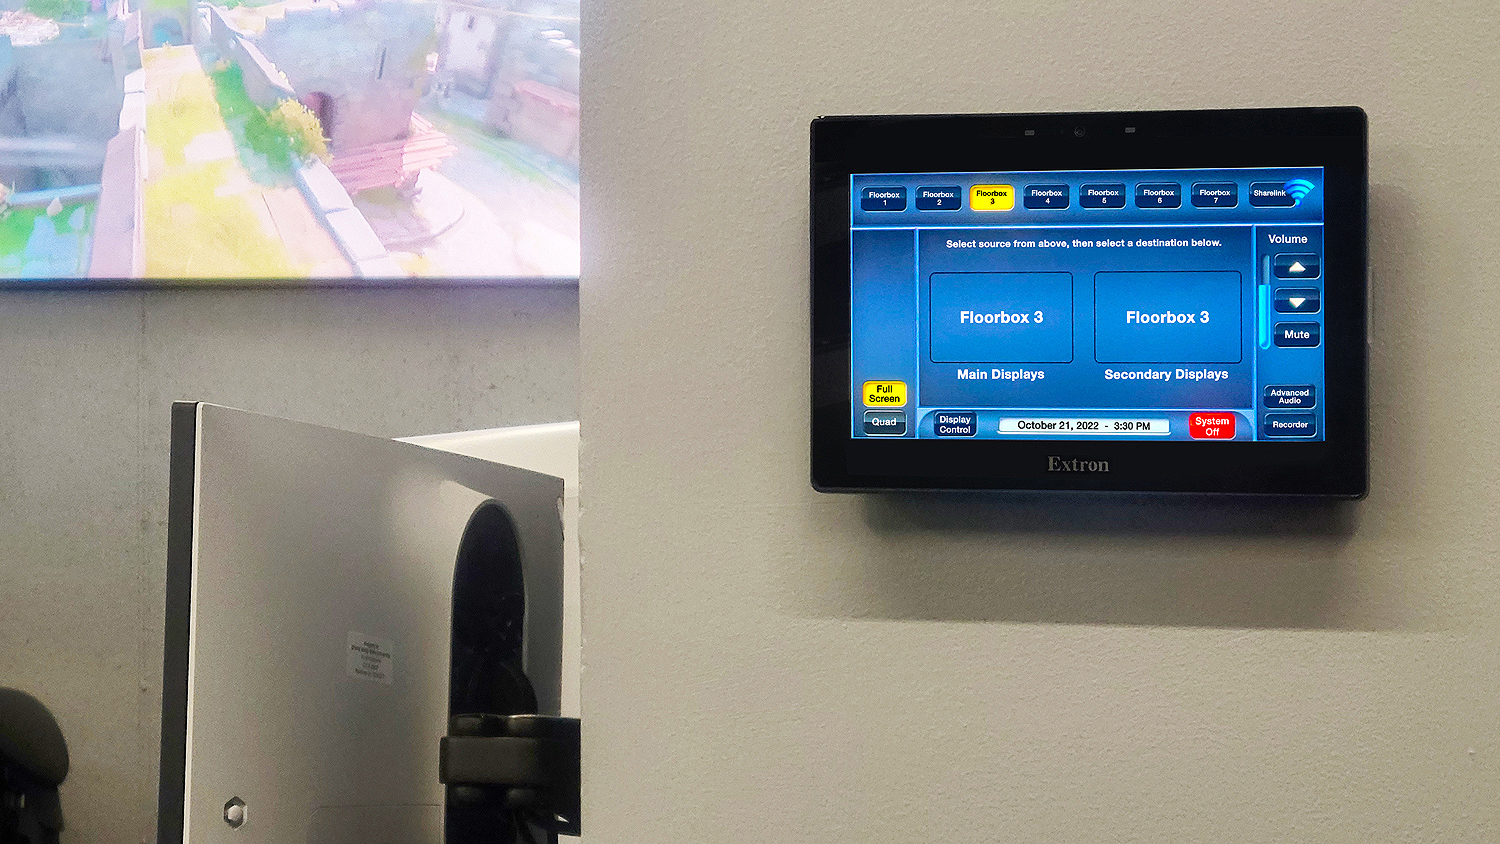 The AV system is controlled using one of the Extron <nobr>TLP Pro 1025M 10" TouchLink<sup>®</sup> Pro</nobr> Touchpanels, which work in conjunction with the <nobr>IPCP Pro 355MQ xi</nobr> control processor built into the <nobr>DTP CrossPoint</nobr> matrix switcher.